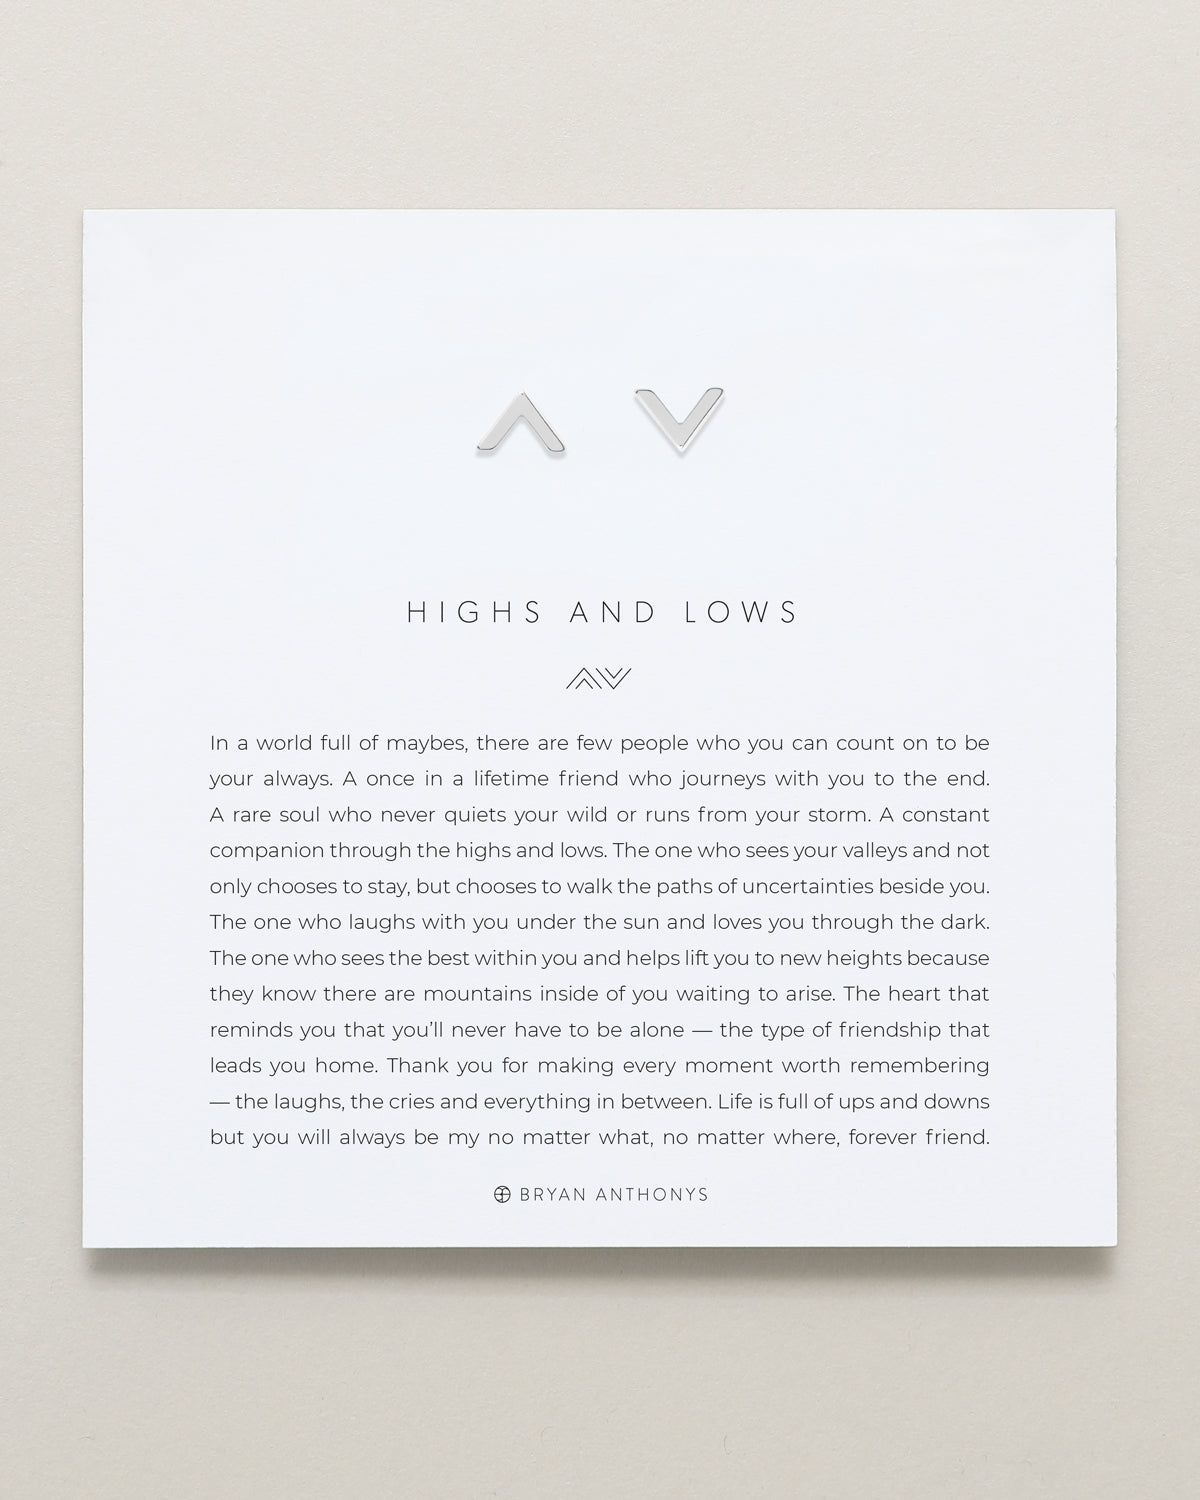 Bryan Anthonys Highs And Lows Silver Stud Earring On Card